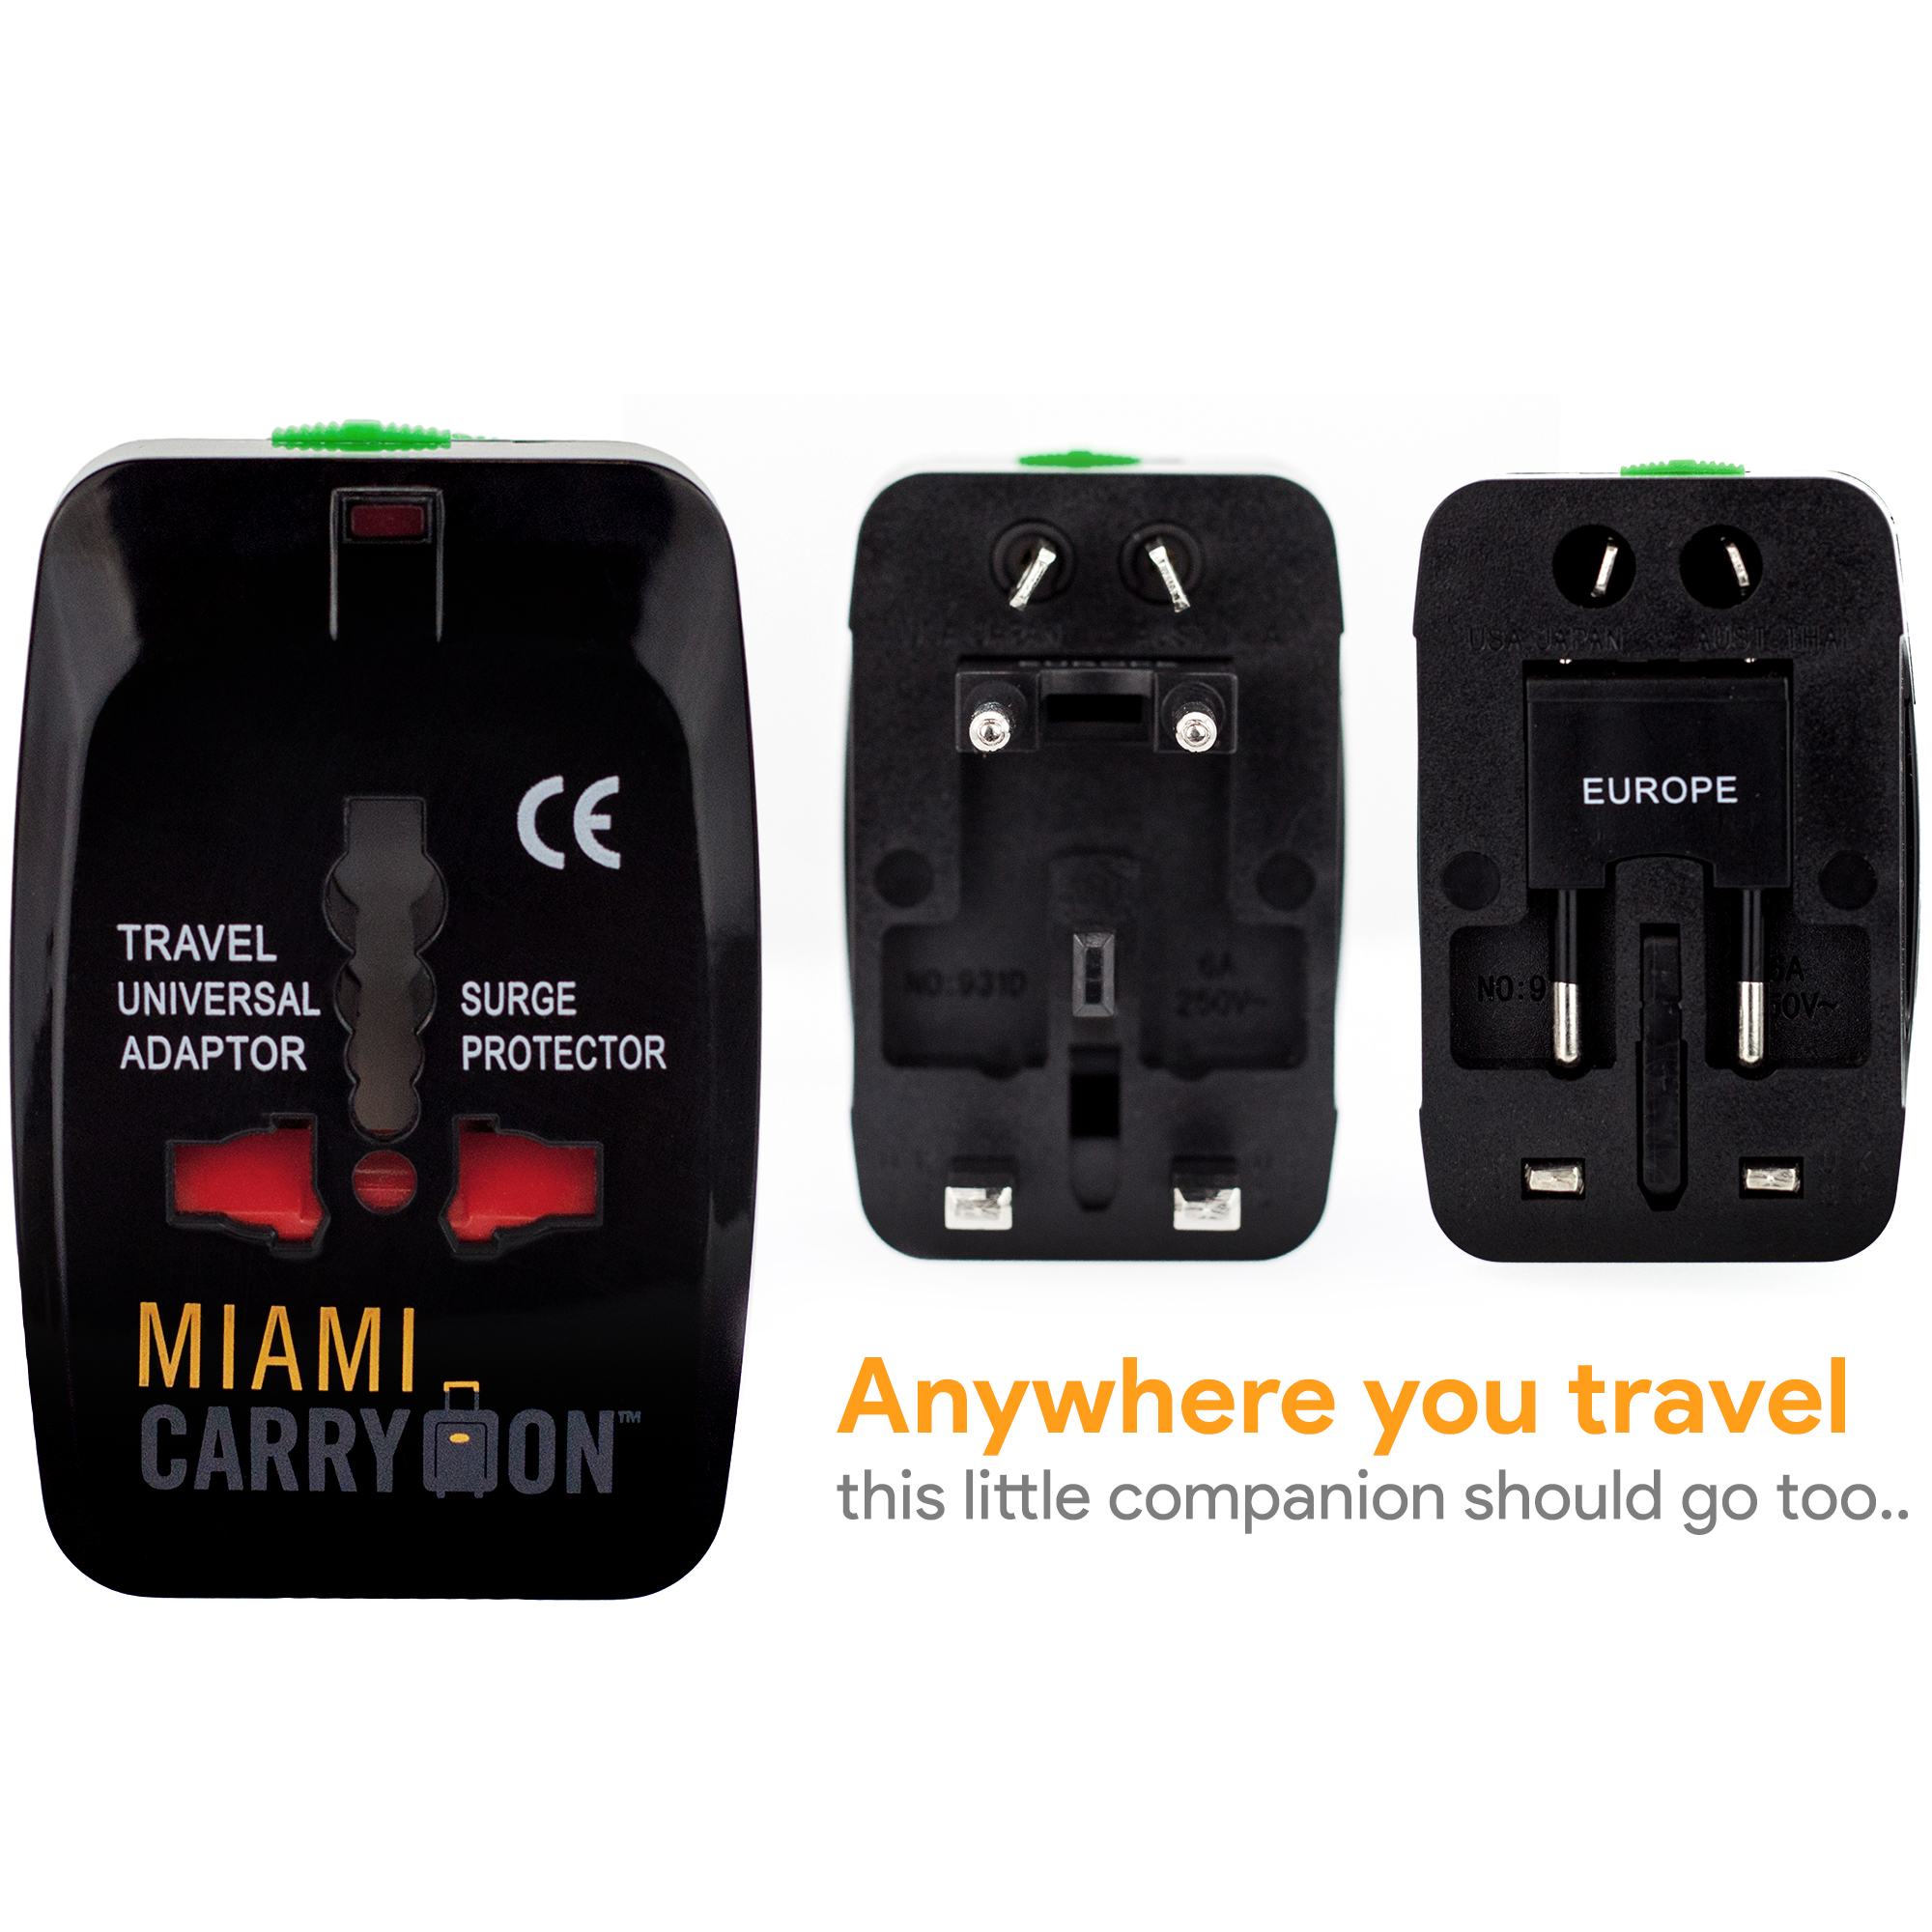 Miami CarryOn Plastic International Travel Adapter with Two USB Ports in Black - image 2 of 12